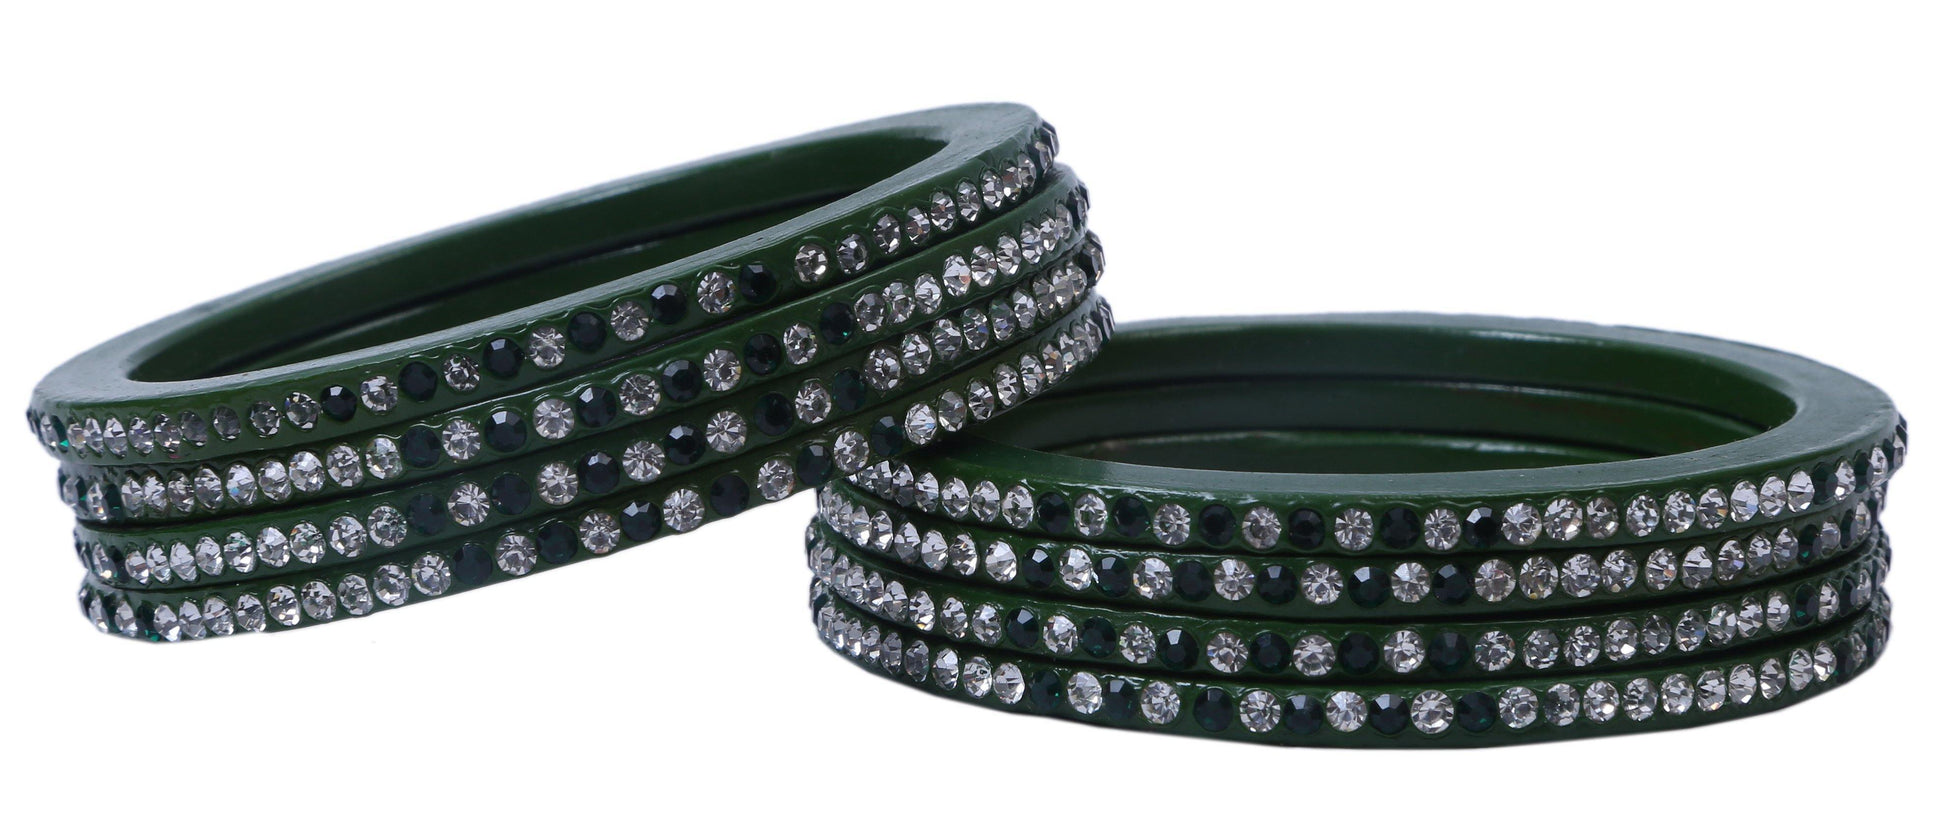 sukriti handcrafted green lac bangles for women - set of 8